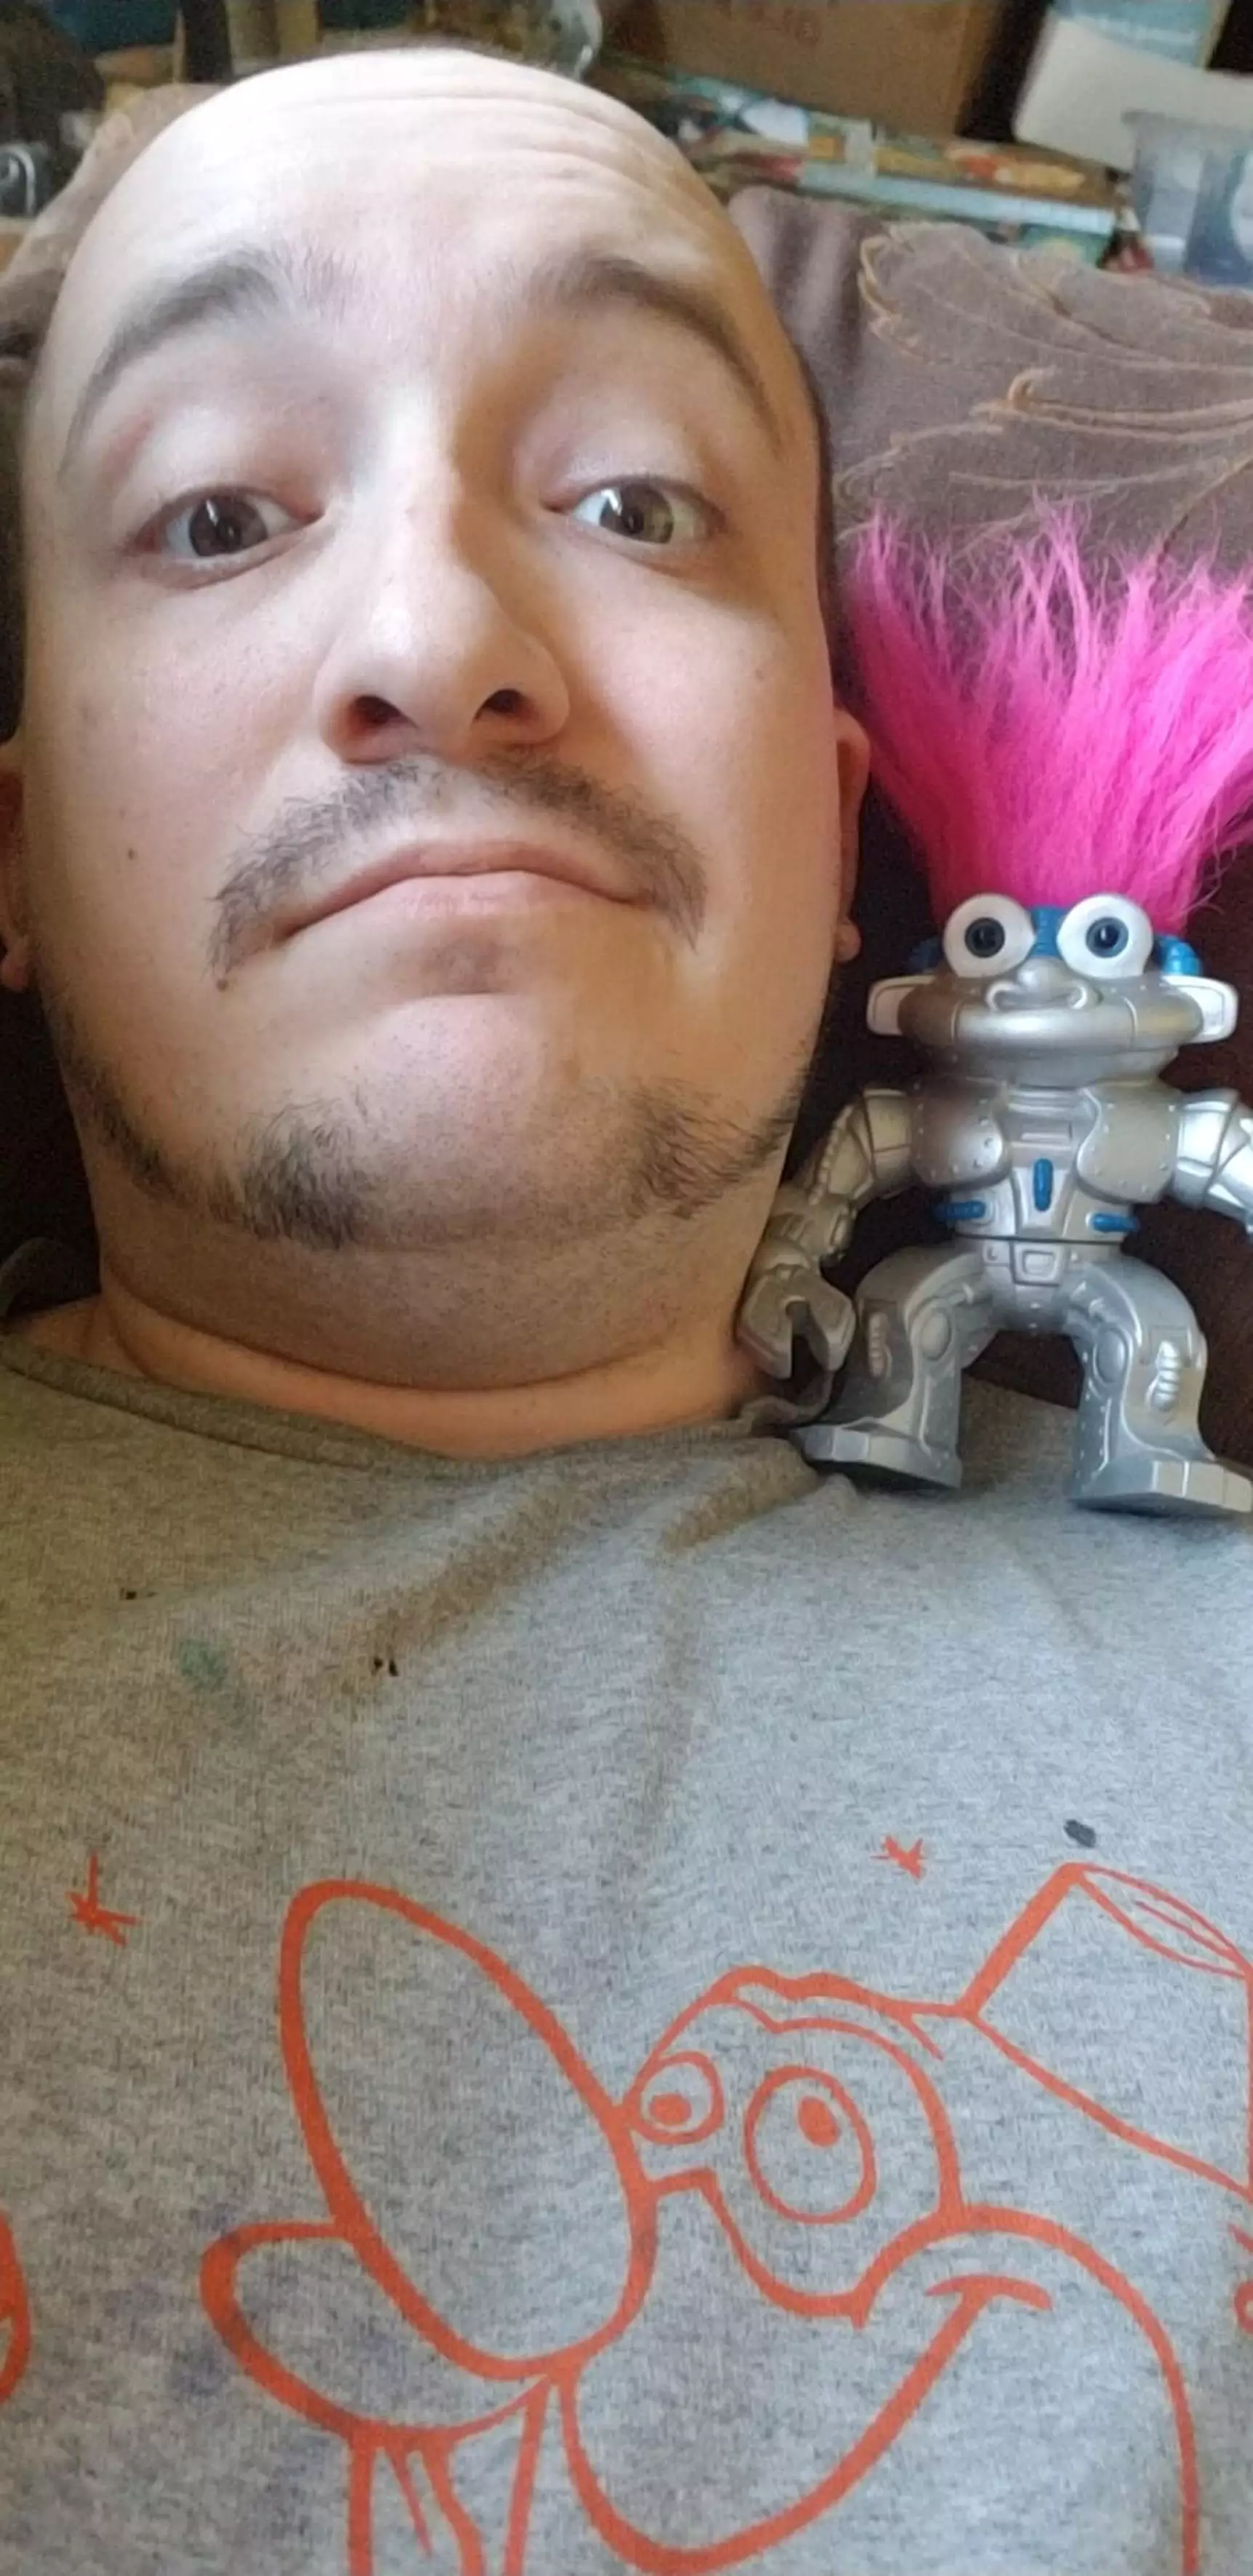 Joey and his RoboTroll.